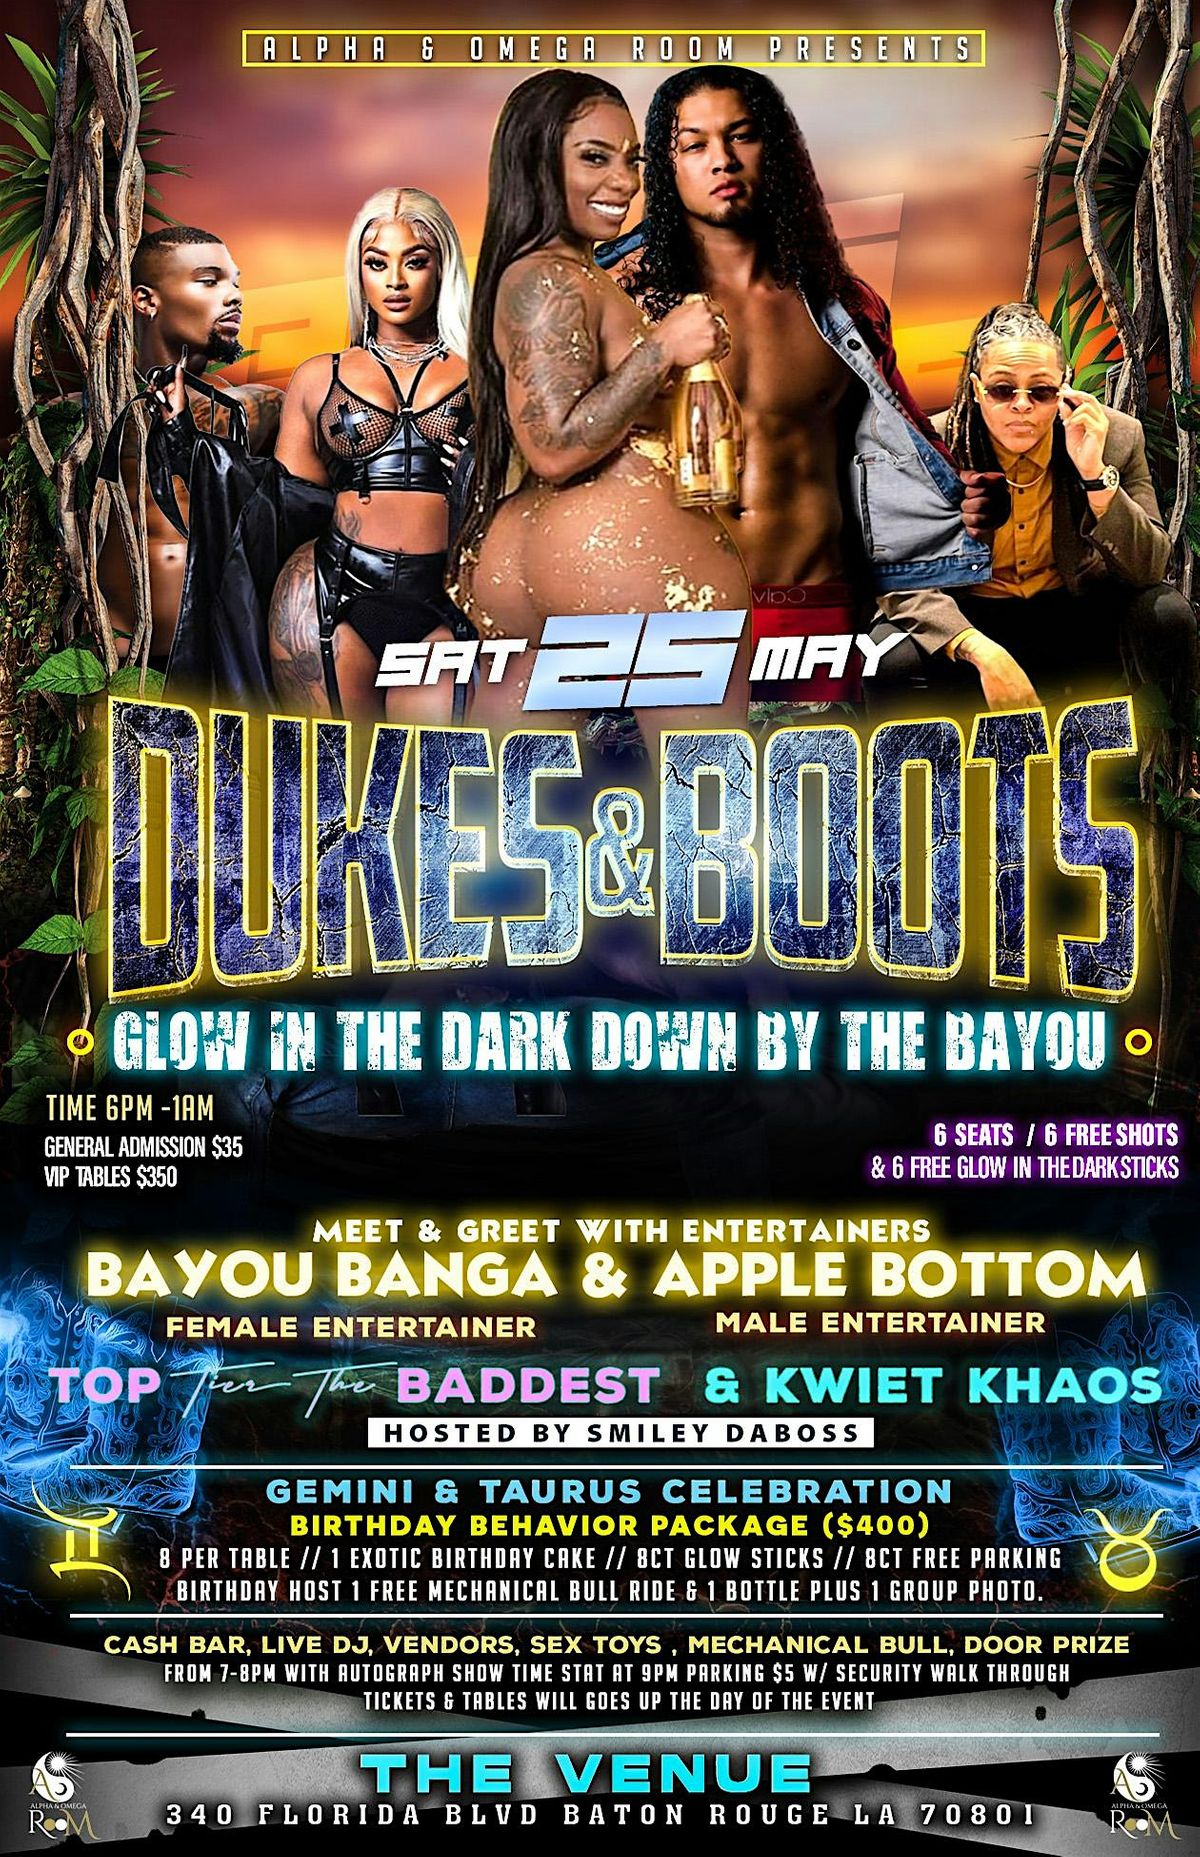 Dukes & Boots Glow In The Dark Down By the Bayou